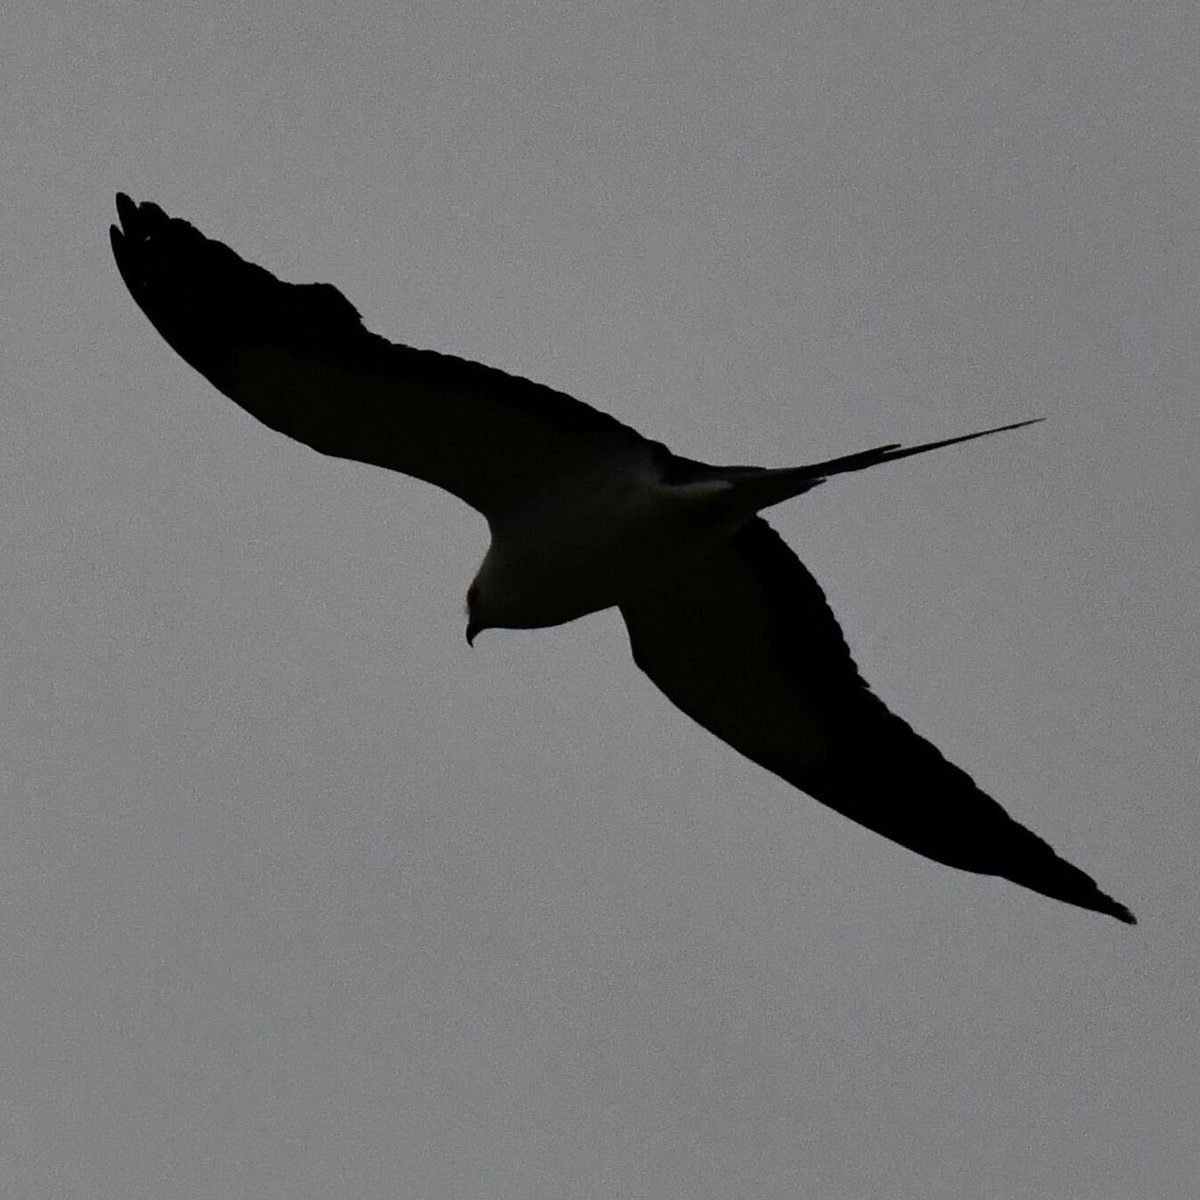 Is this a Swallow-tailed Kite seen northbound over the Marine Park trail in Brooklyn today? Appeared to be chasing or being chased by another unidentified bird. Longish looking with a noticeable distinct scissor-like tail, not seen well in these photos but seen from the trail.